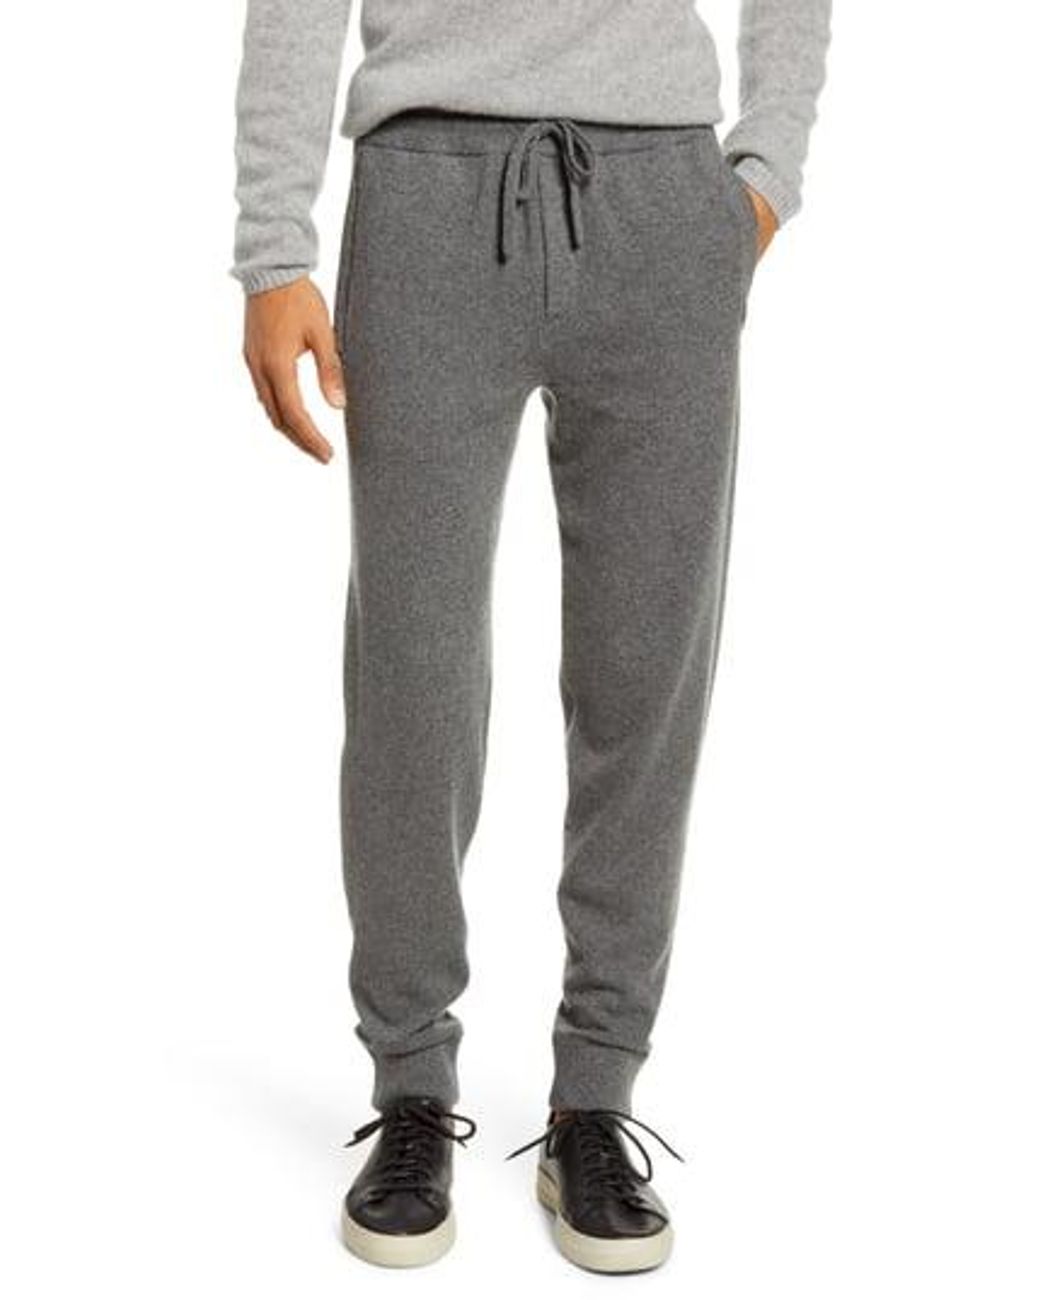 Vince Cashmere & Wool Sweatpants in Gray for Men - Lyst